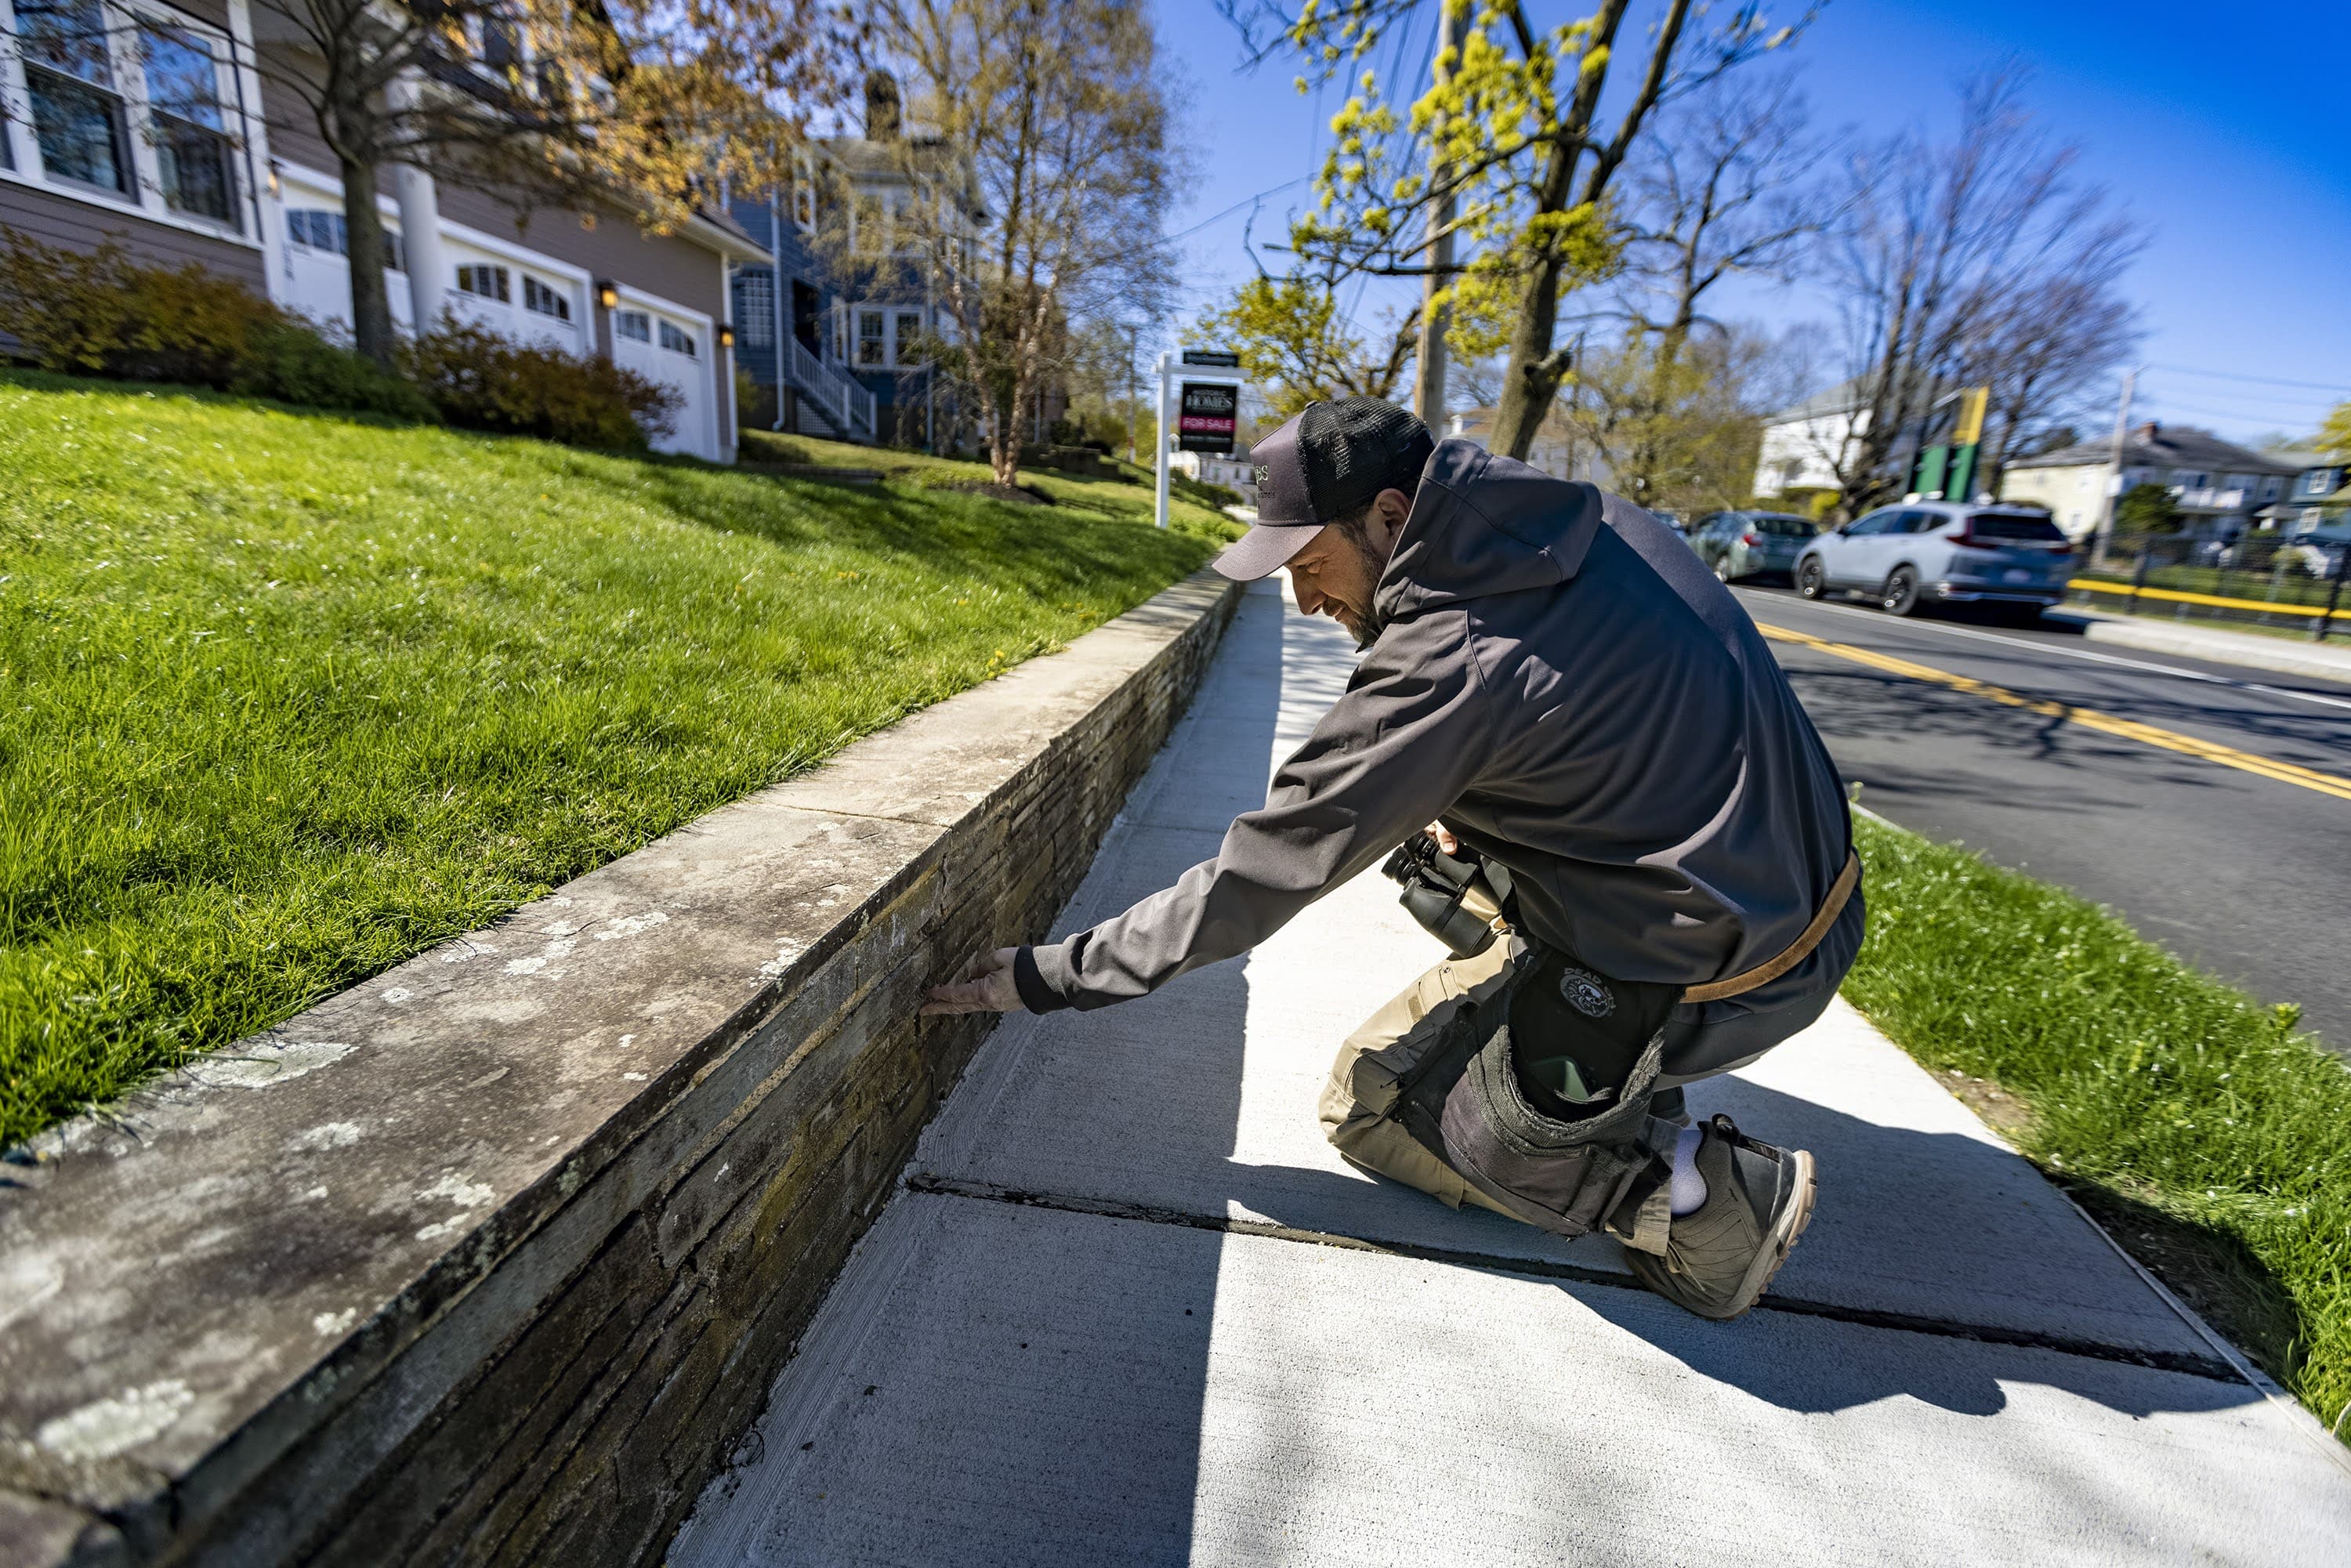 Alex Steinberg, of JBS Home Inspections, examines the condition of a stone wall in front of a house during an inspection in Newton. (Jesse Costa/WBUR)